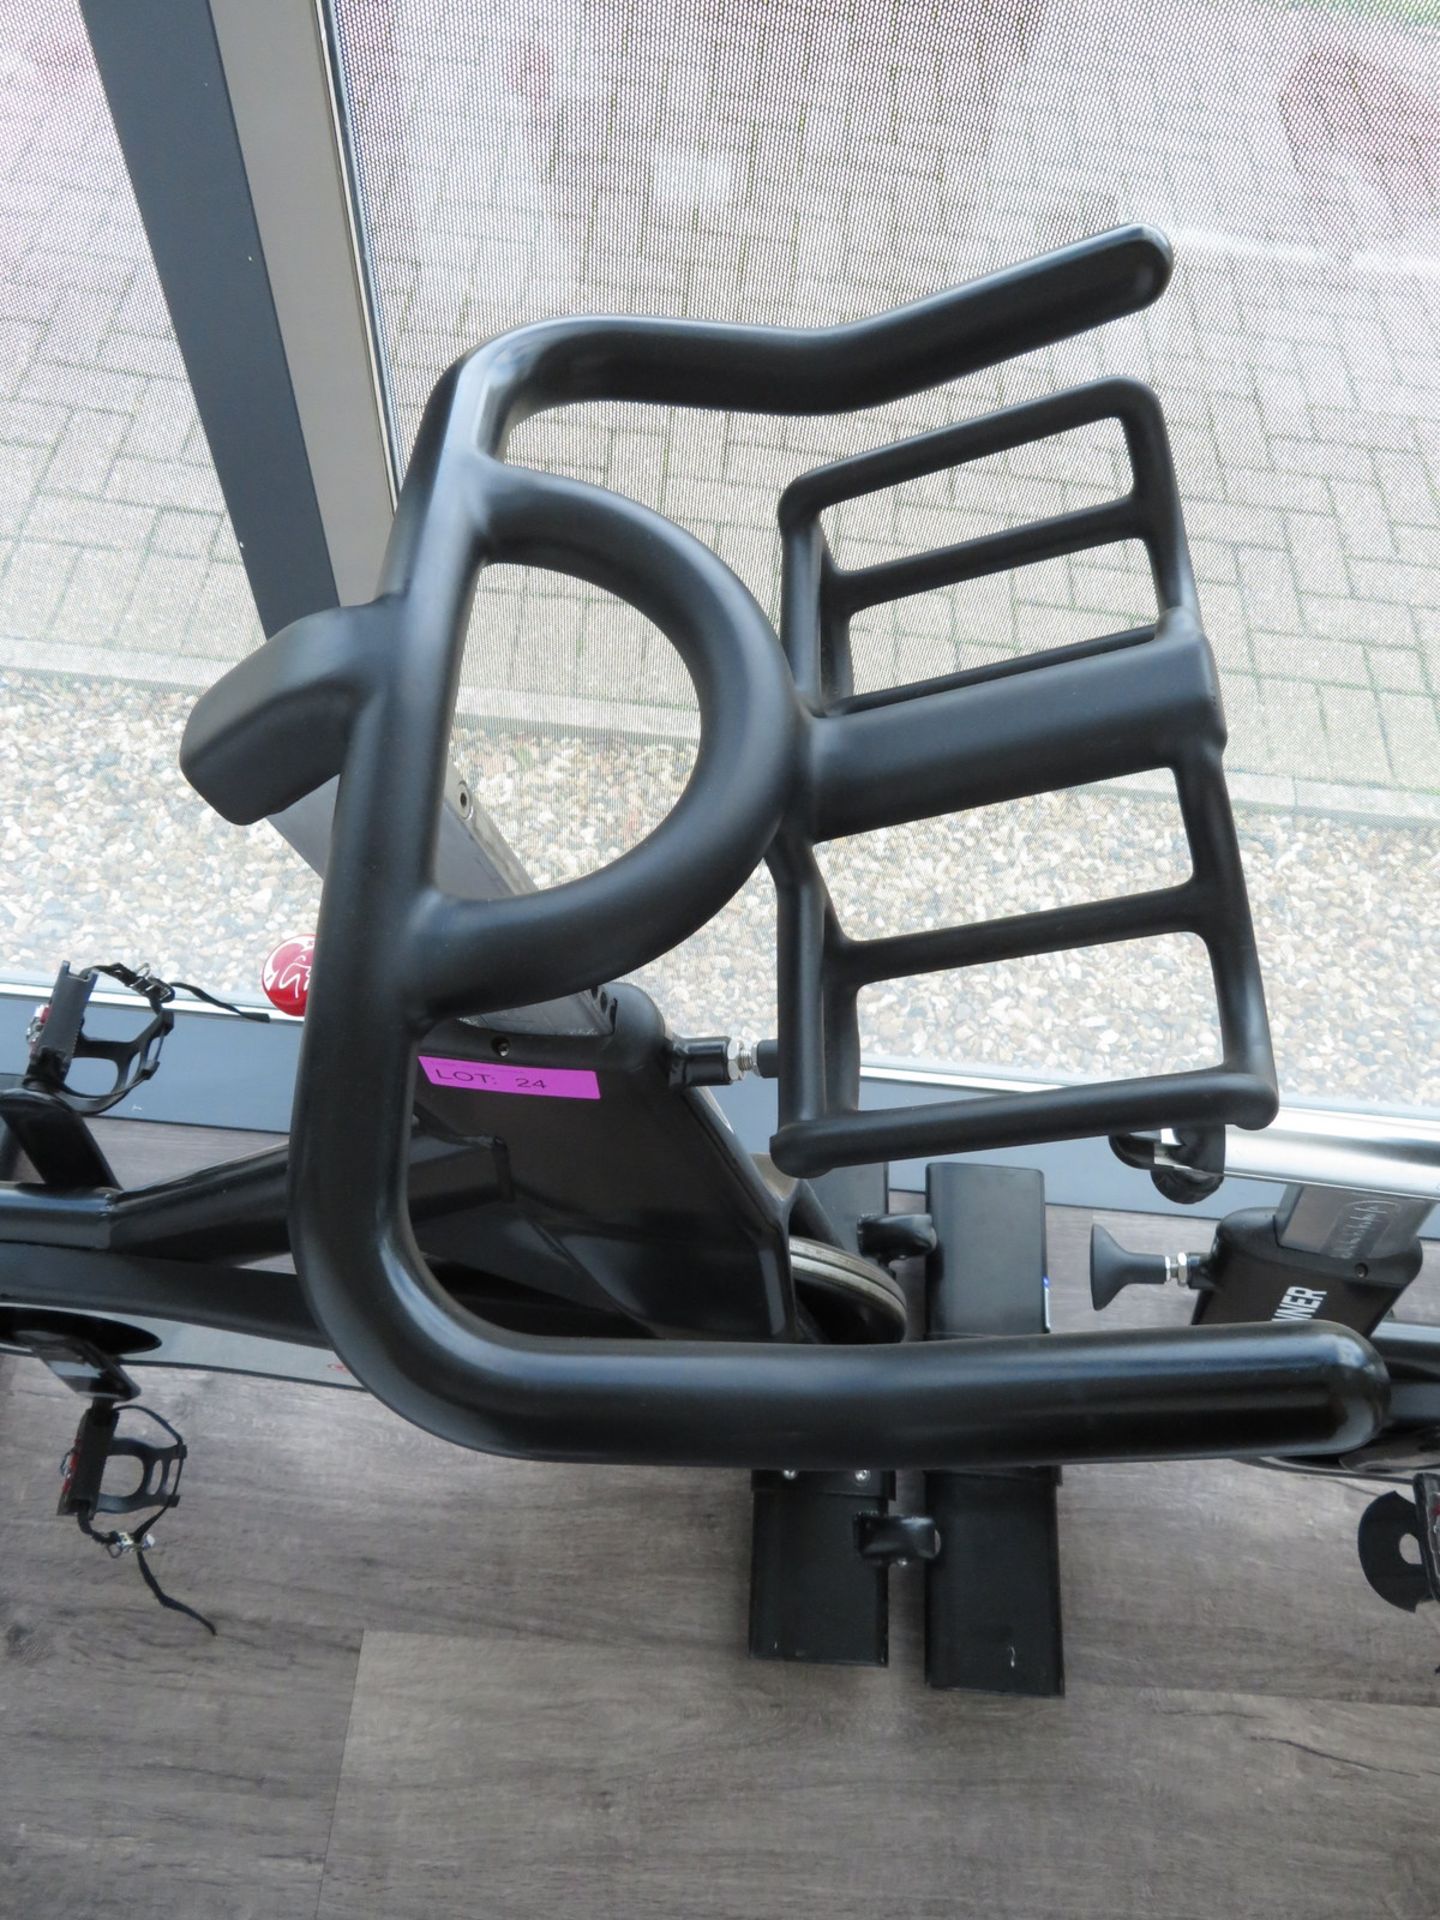 Star Trac Spinner Exercise/Spinning Bike. Good Working Condition. - Image 5 of 7